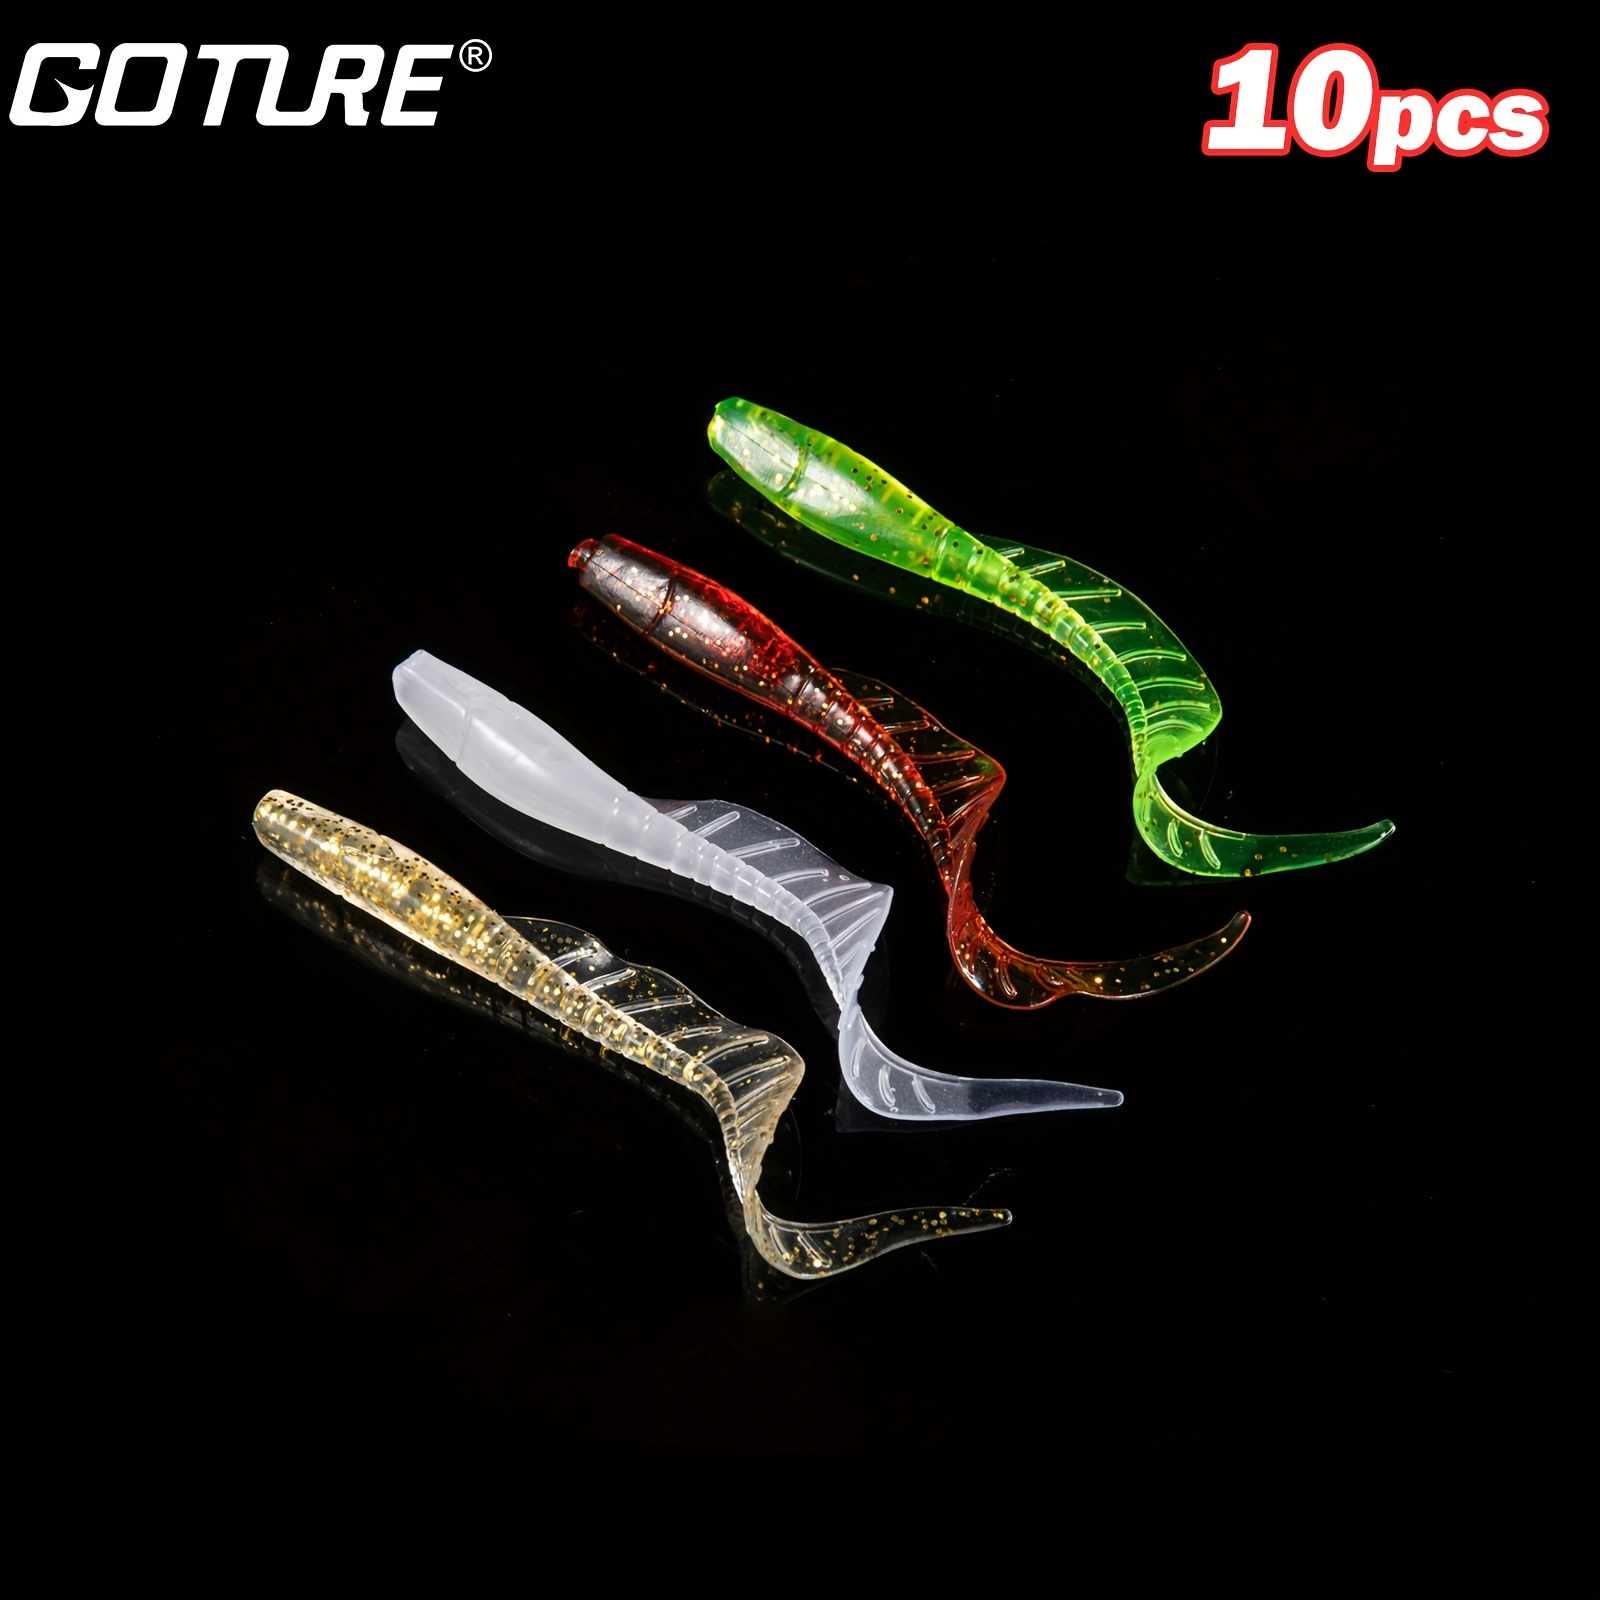 THKFISH 20Pcs/Box Soft Fishing Lure Worm Lure with Swimming Tail Plastic Fishing  Worms Grub Baits for Bass Crappie Walleye